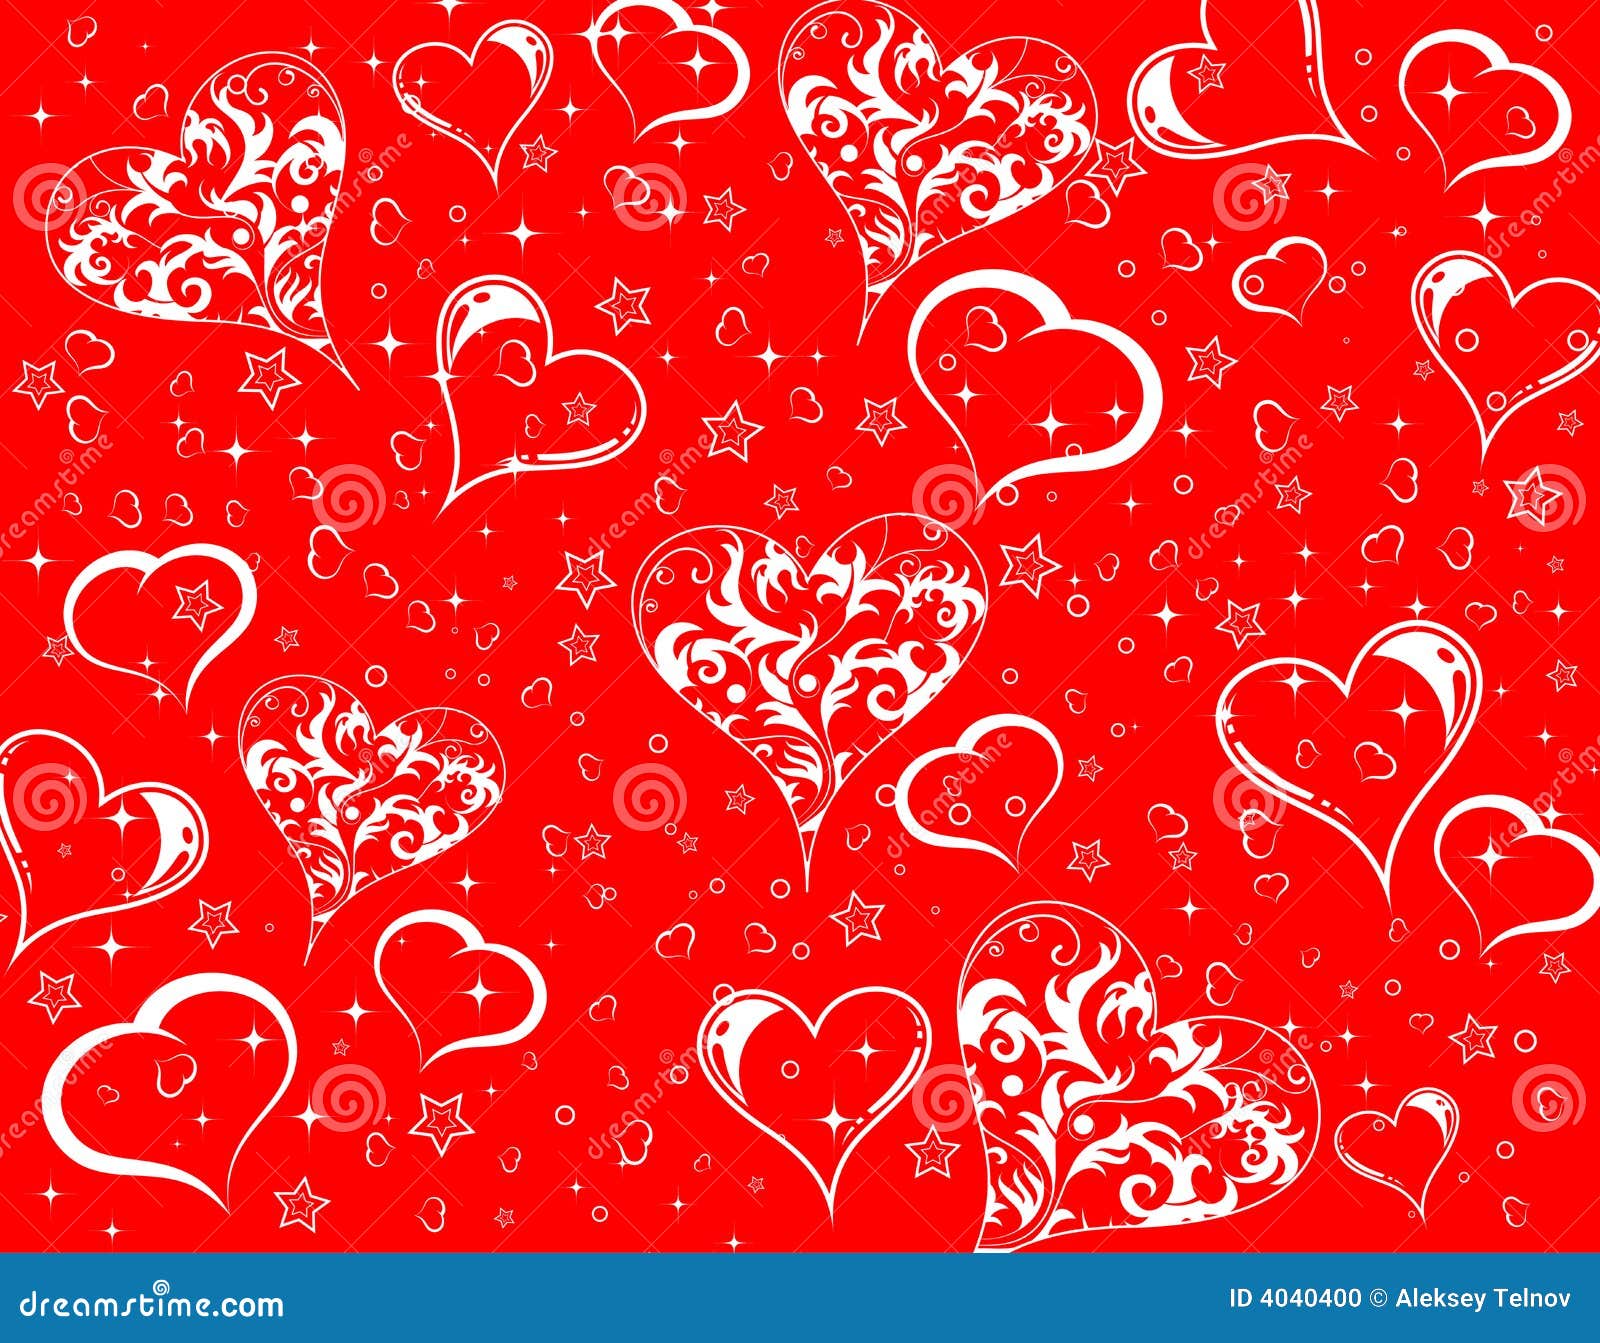 Valentines Day Background With Hearts And Flowers Stock Photo - Image ...